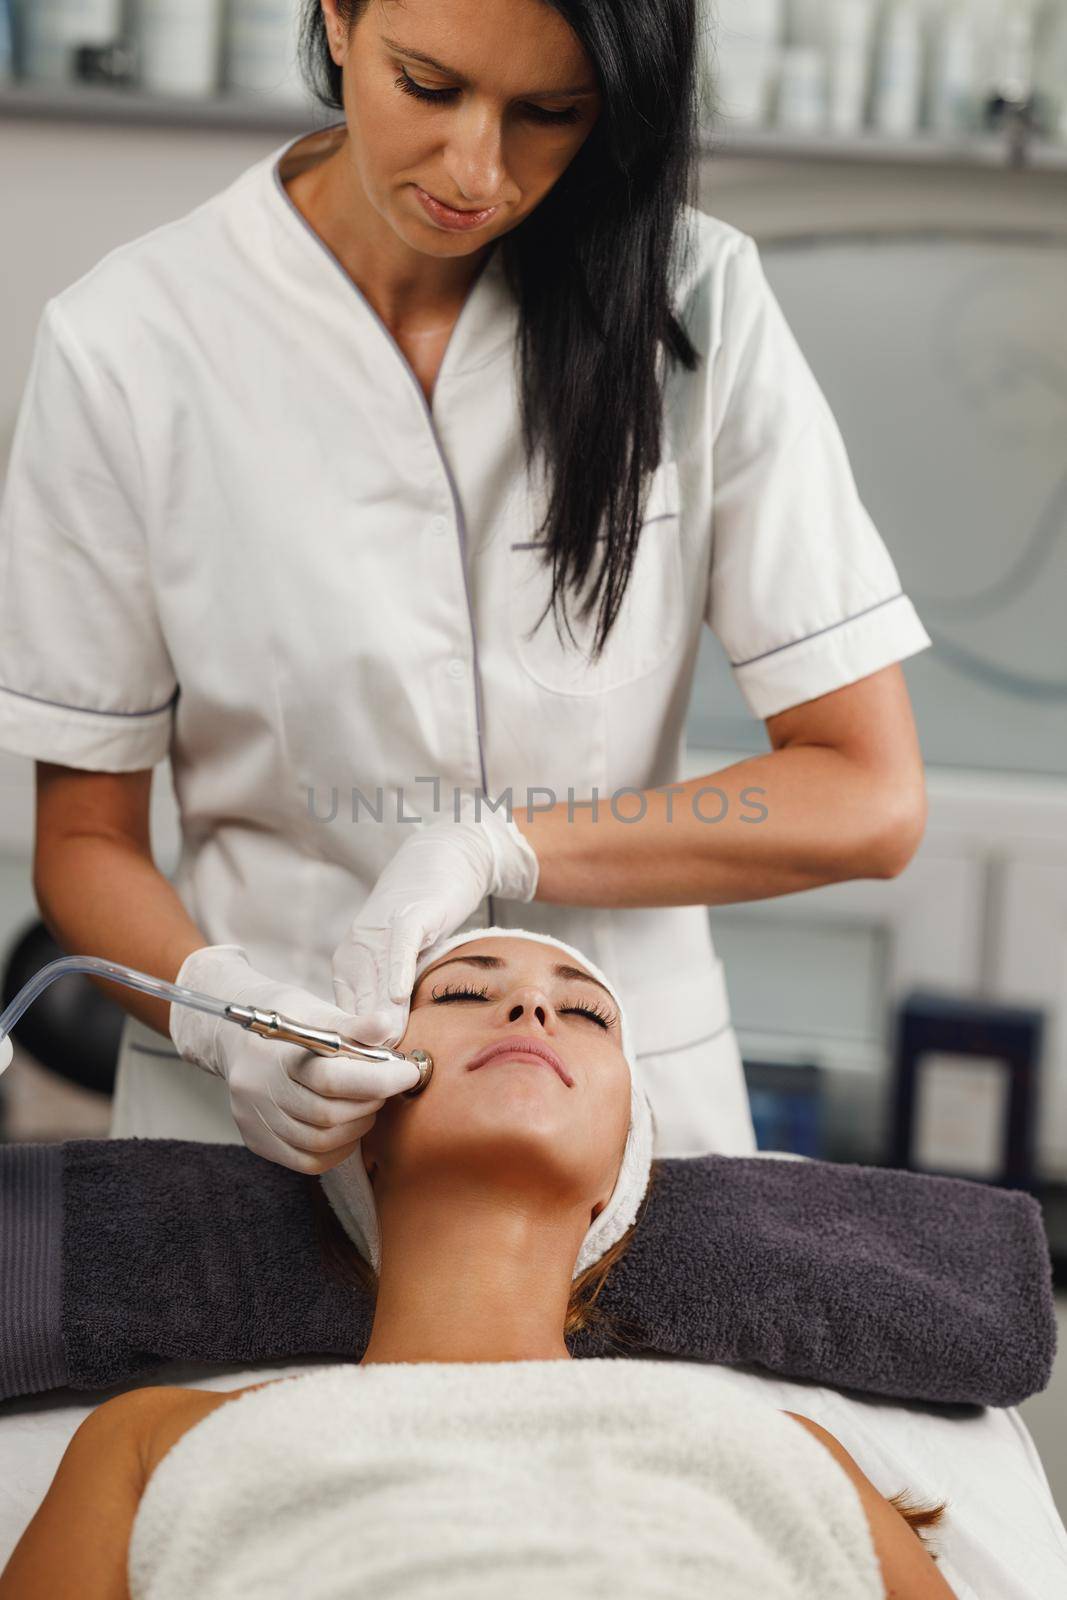 Microdermabrasion Treatment In A Beauty Salon by MilanMarkovic78